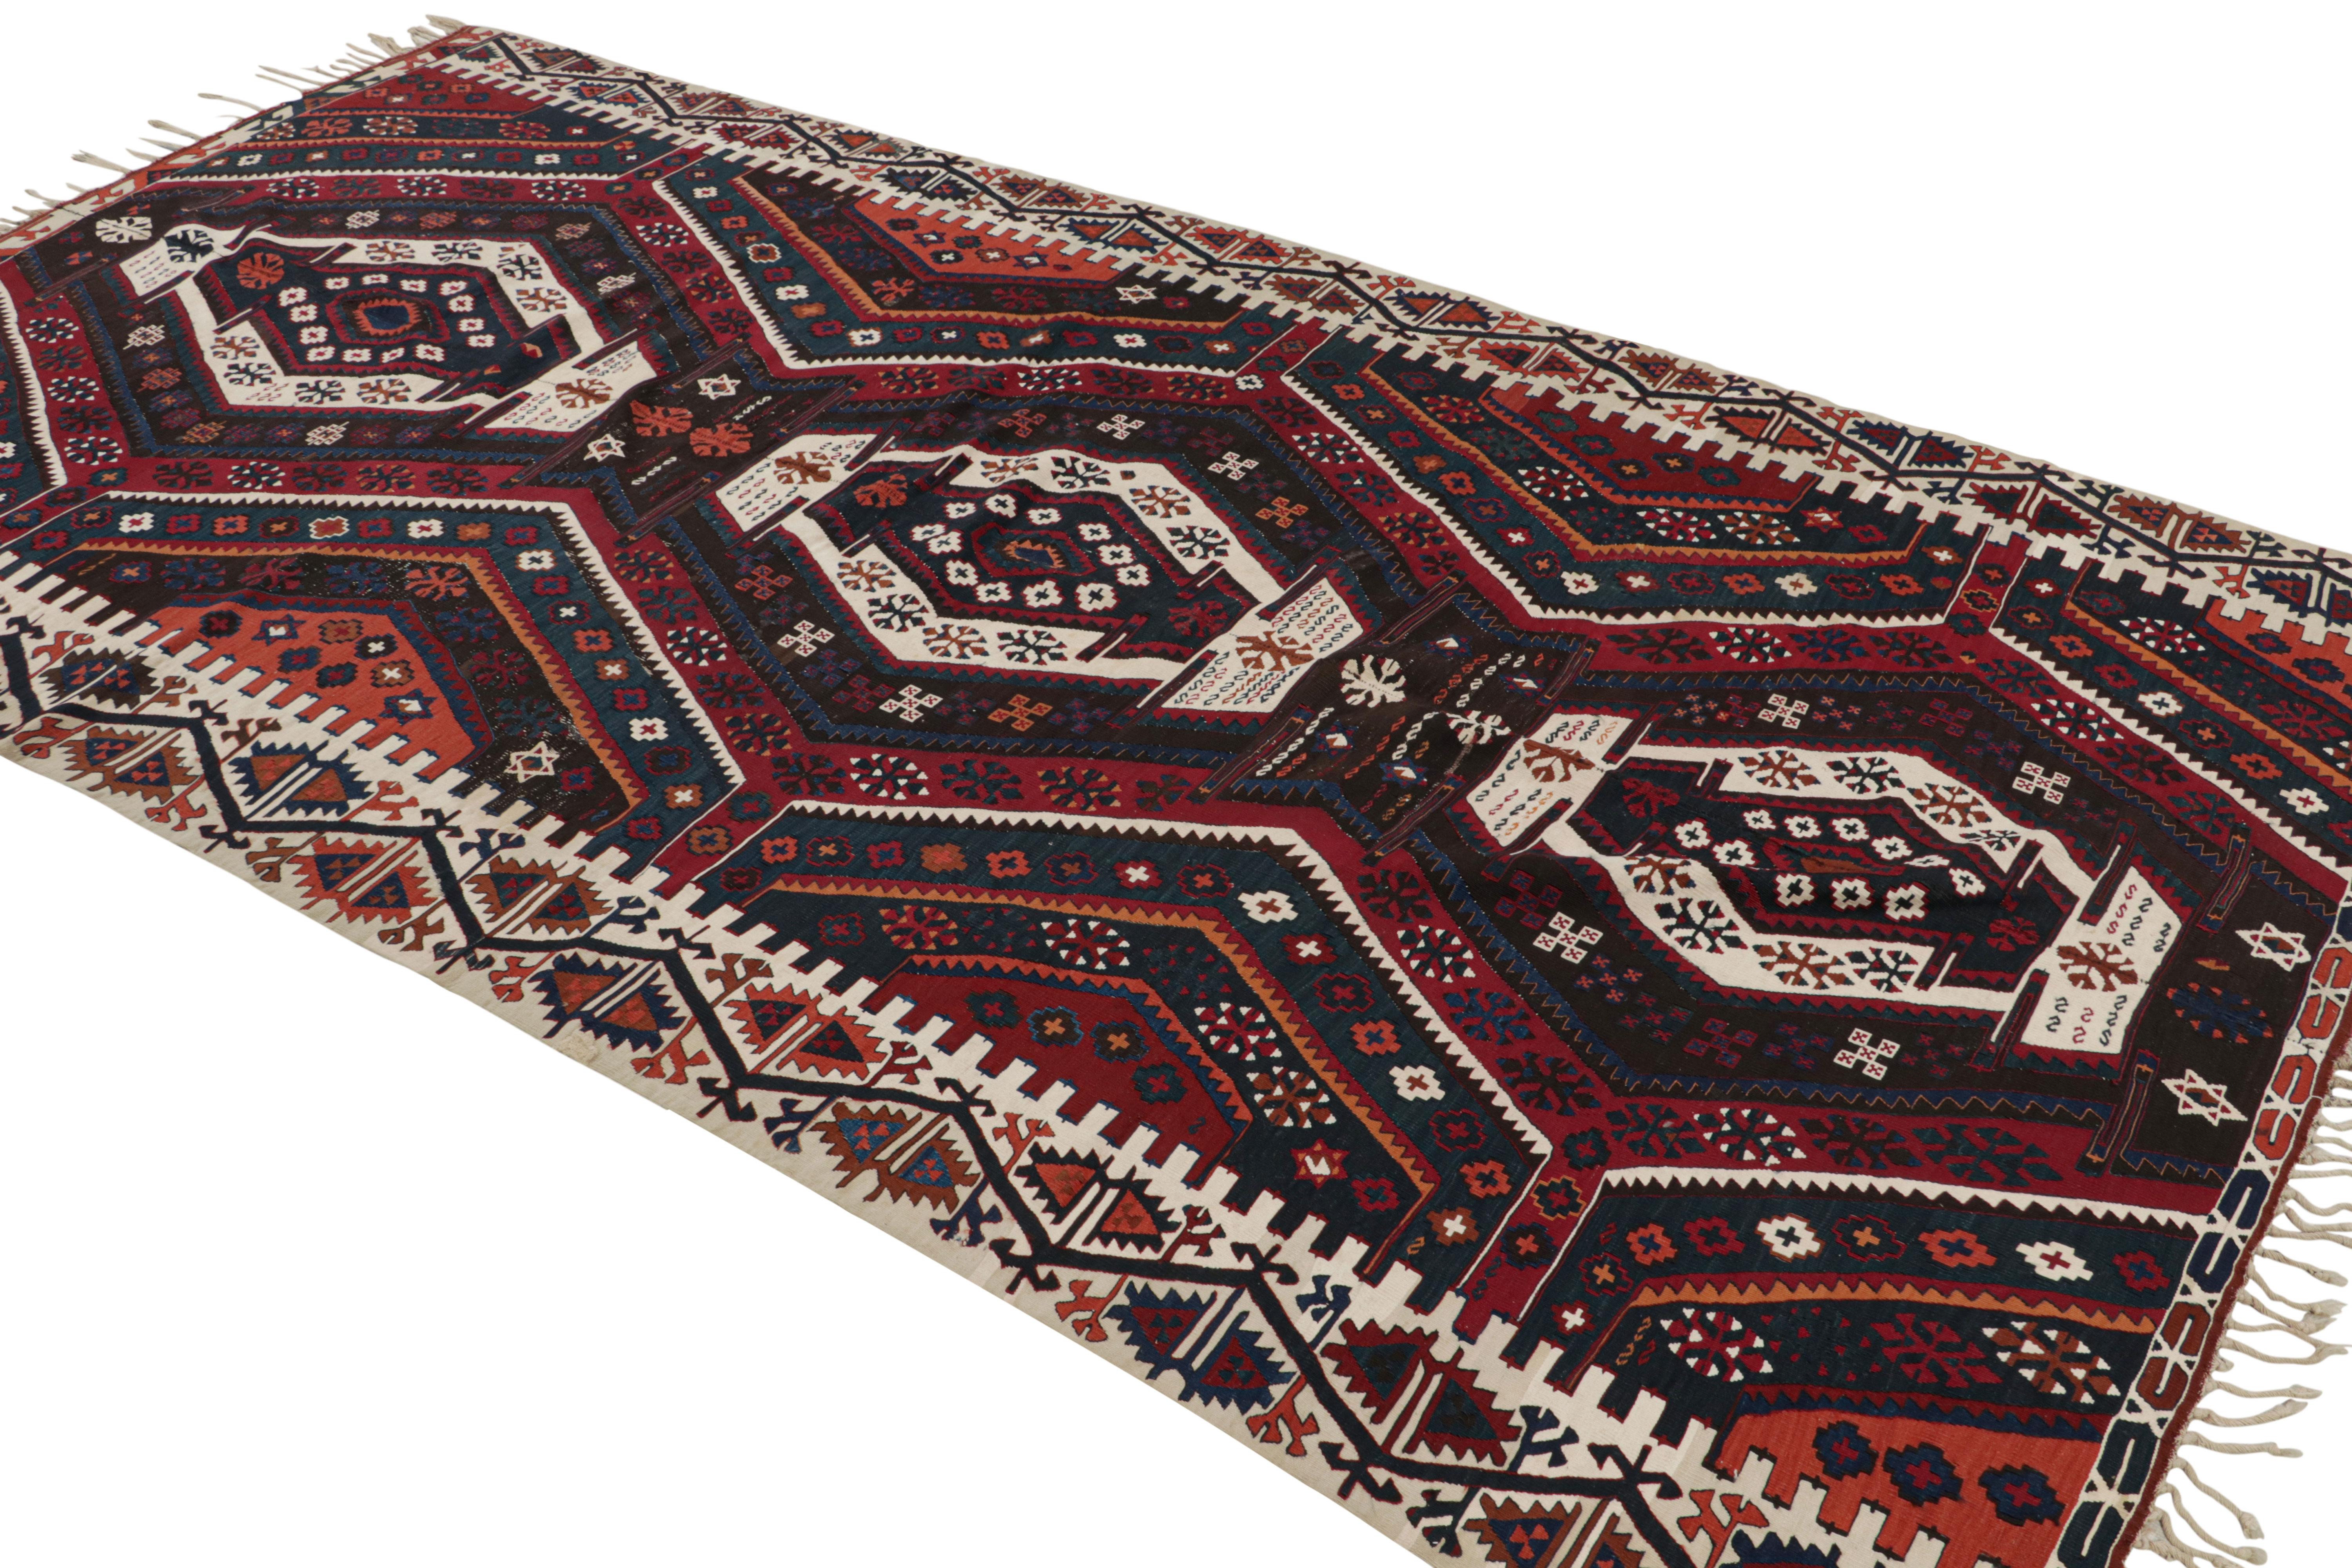 Hand woven in wool, this vintage 6x12 Turkish kilim features all-over polychromatic geometric patterns on a rich burgundy red field. 

On the Design: 

Connoisseurs will admire this personal vintage piece meant to catch the eye, yet still so